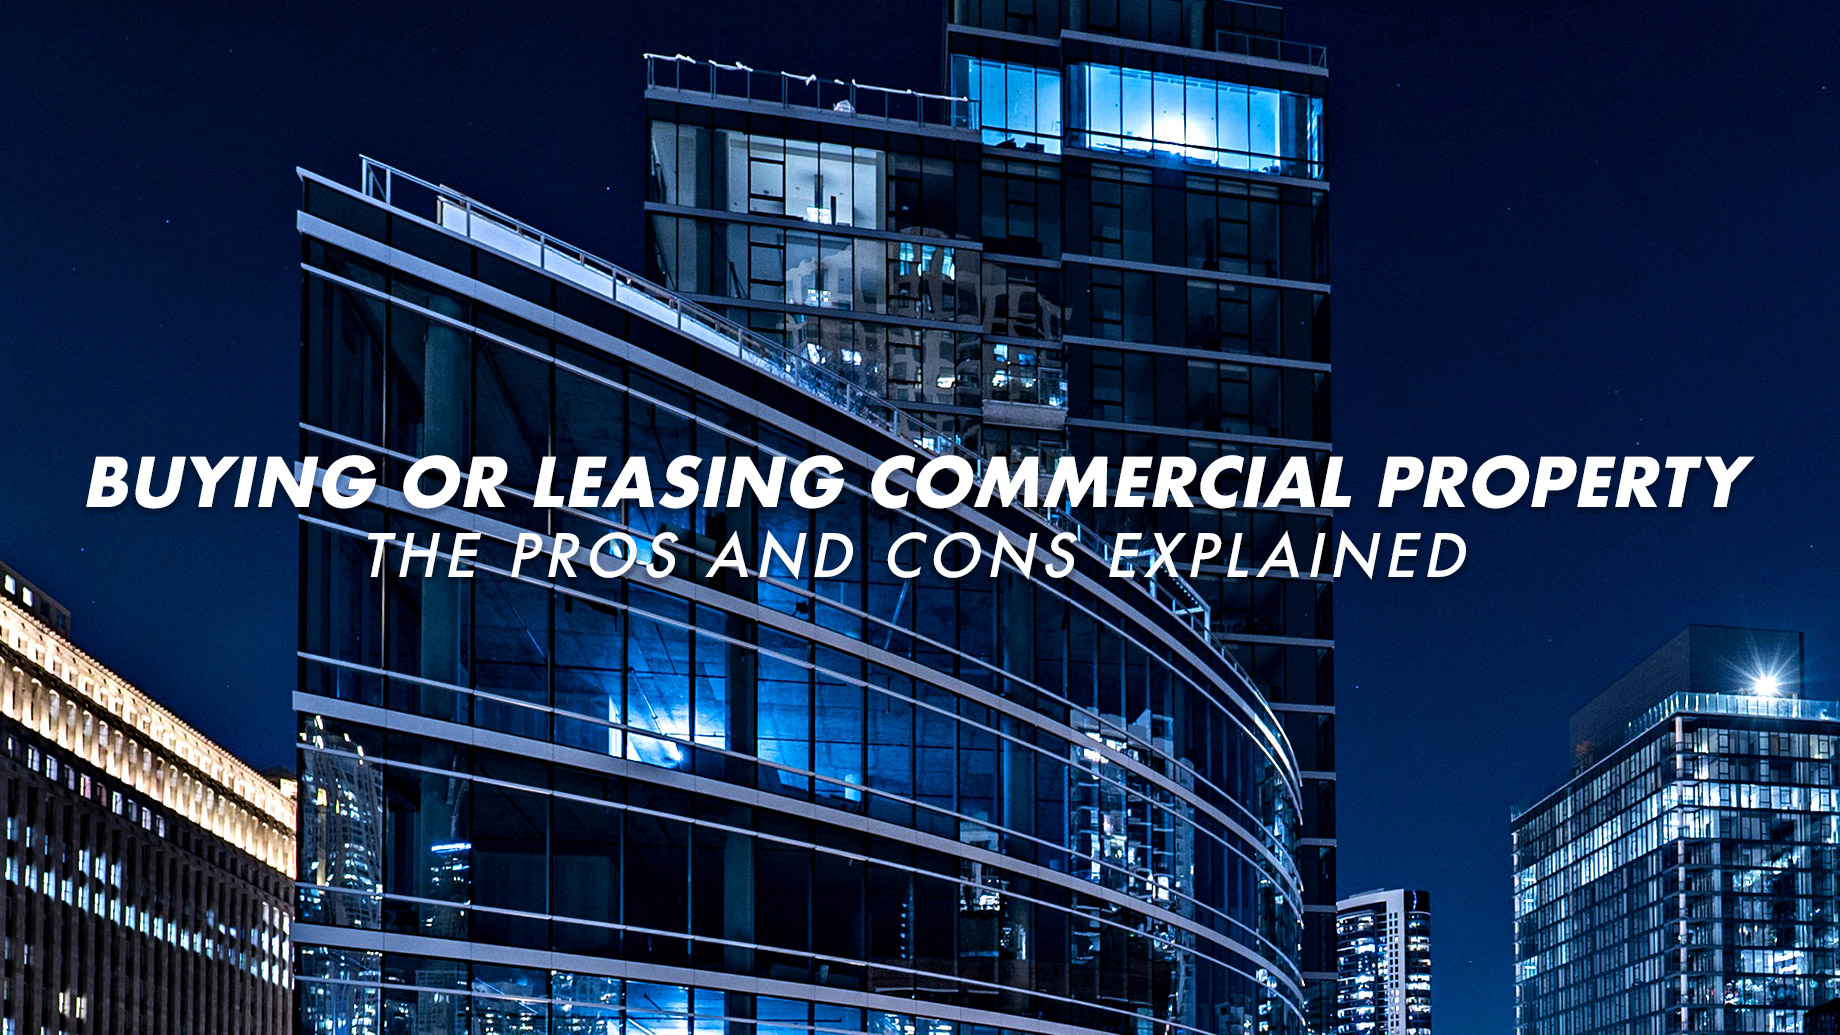 Buying or Leasing Commercial Property - The Pros and Cons Explained